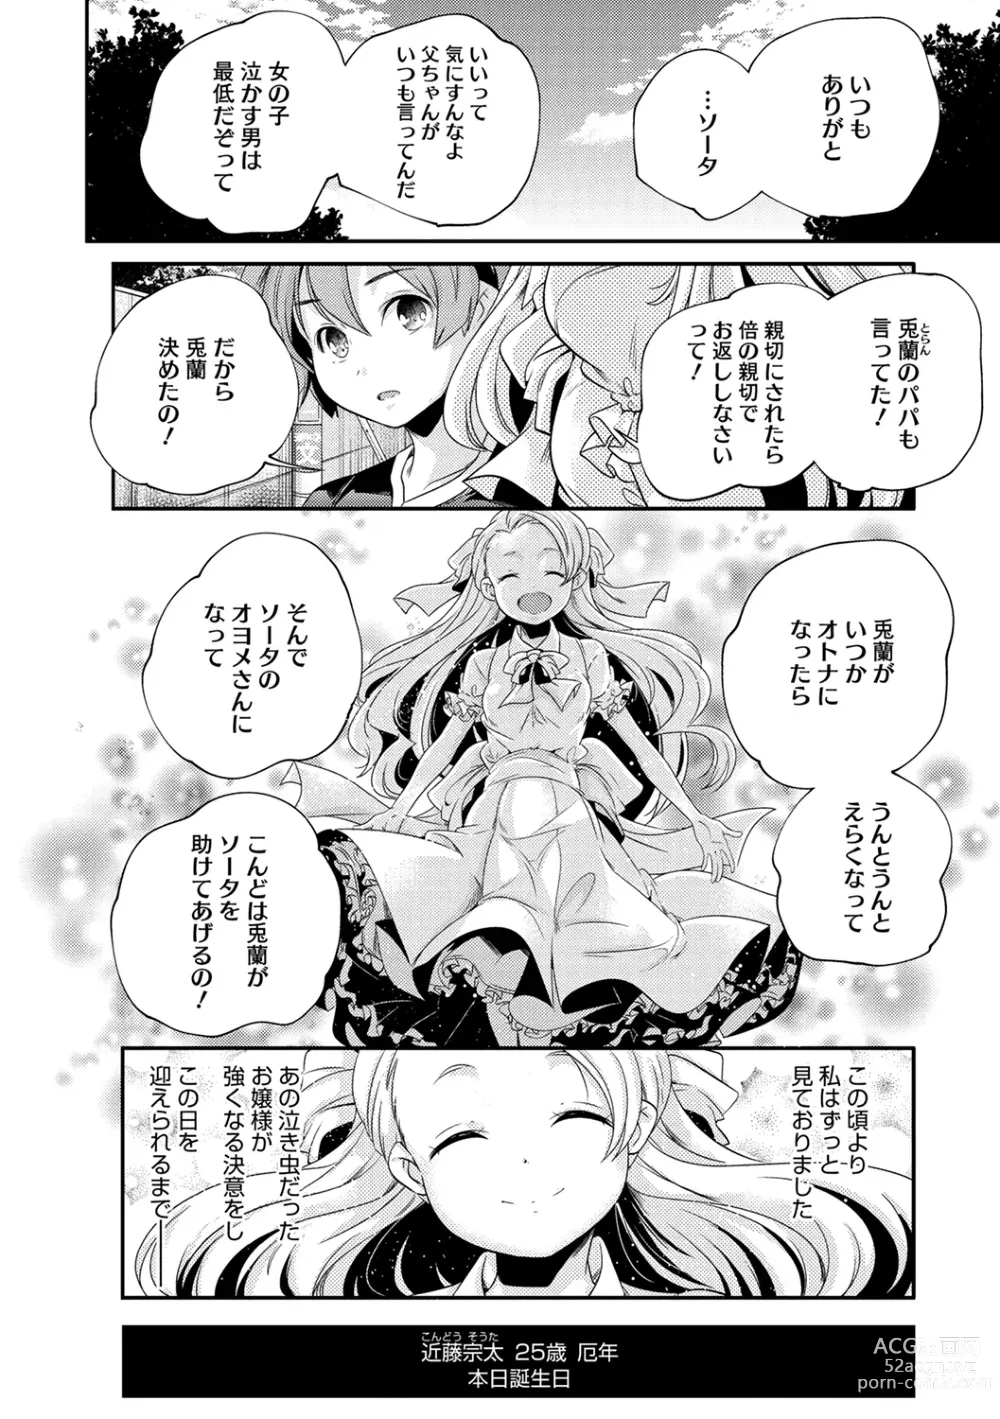 Page 22 of manga LQ -Little Queen- Vol. 52